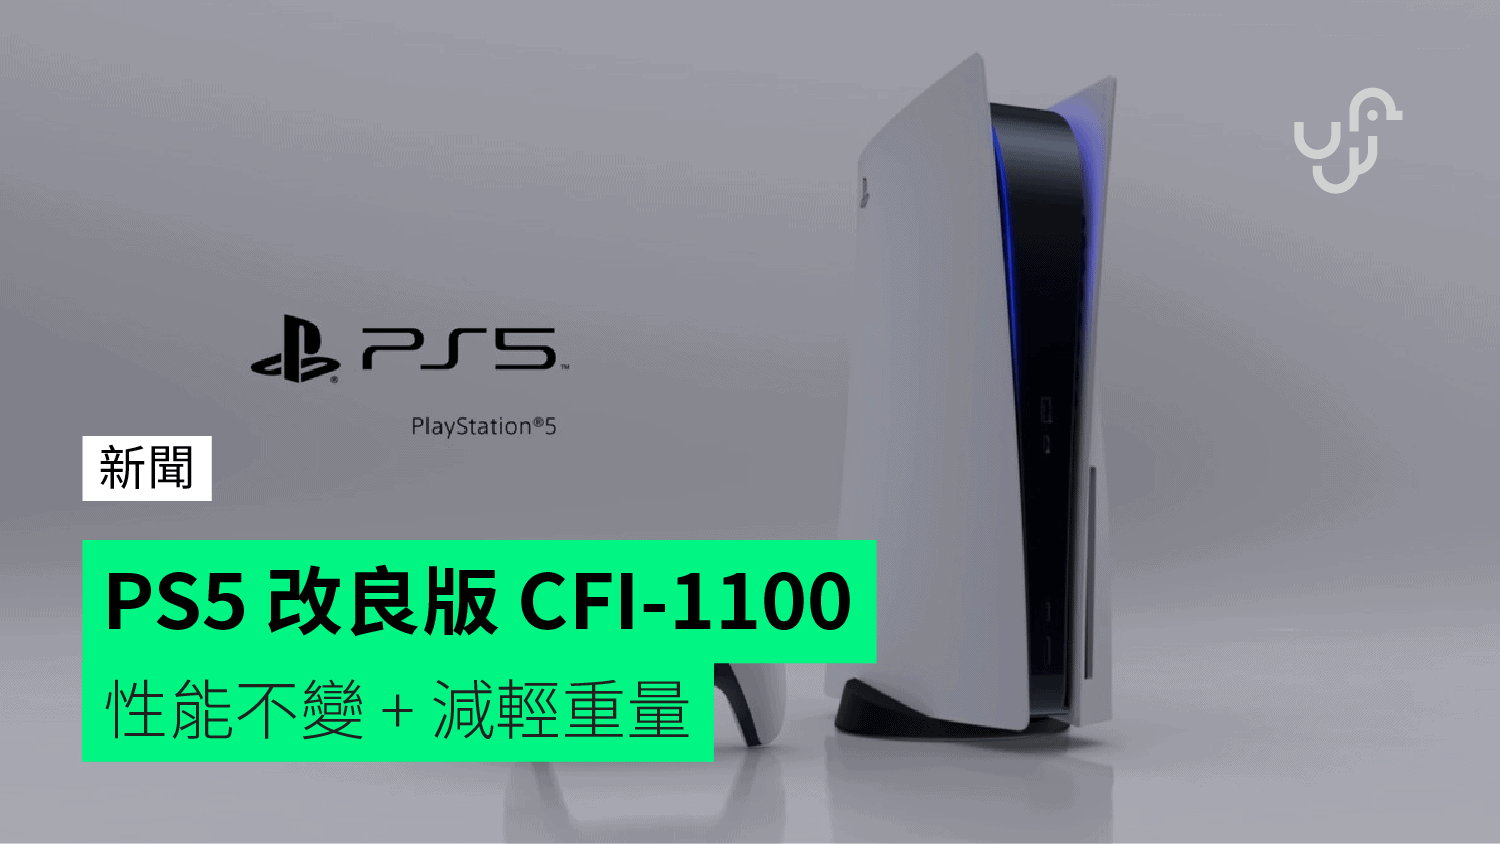 PS5 Improved CFI-1100 Performance unchanged + reduced weight 